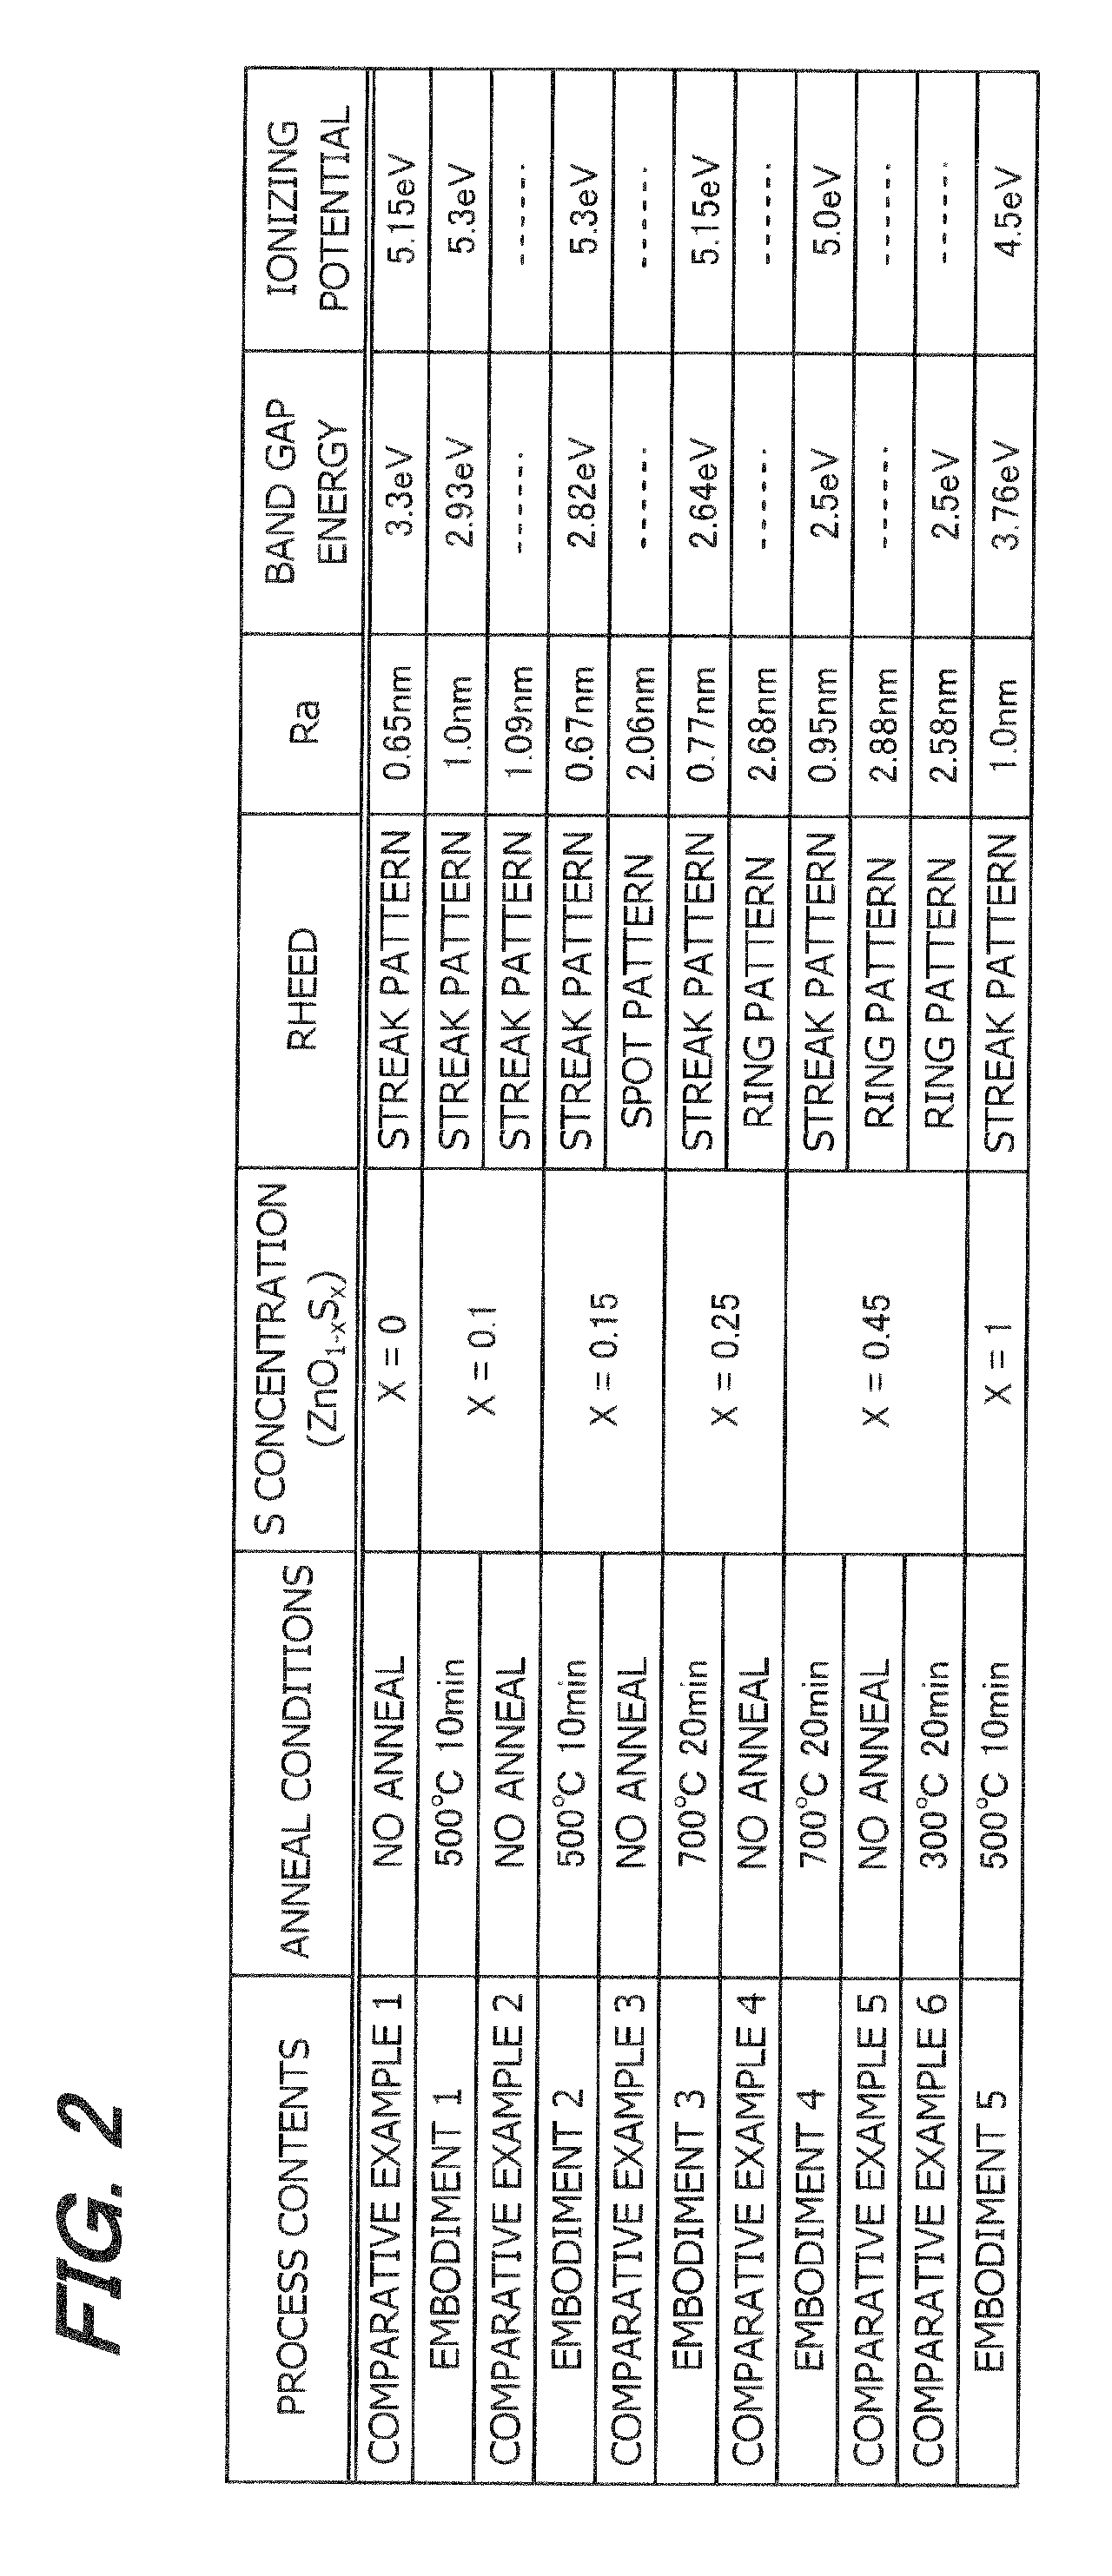 ZnO BASED SEMICONDUCTOR LIGHT EMITTING DEVICE AND ITS MANUFACTURE METHOD